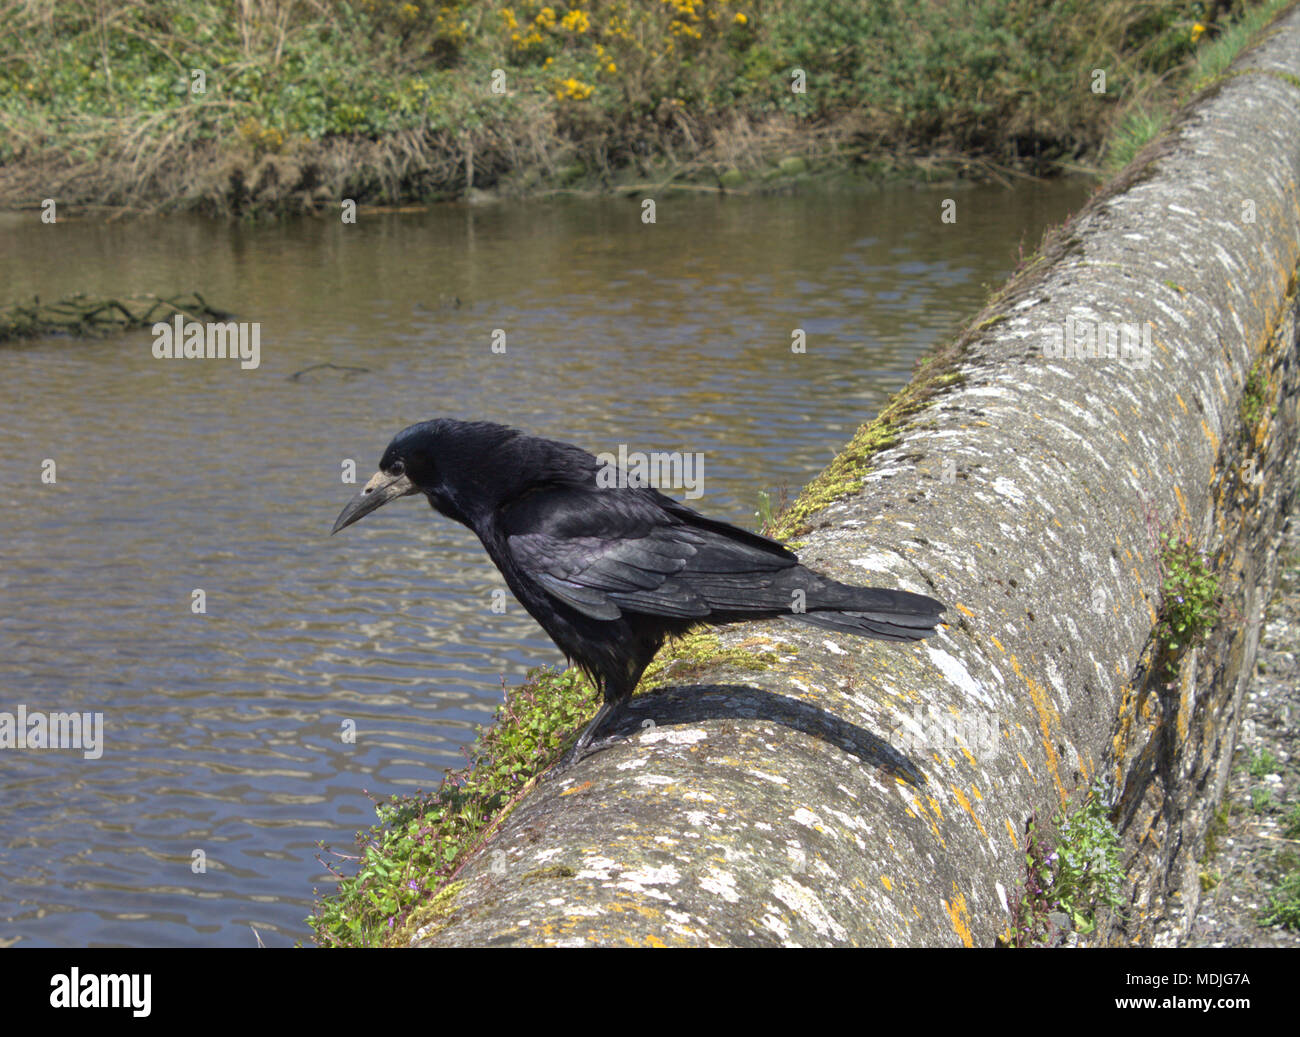 Corvus frugilegus, common rook, in full adult plumage perched on a stone wall watching the waters edge for food. Stock Photo